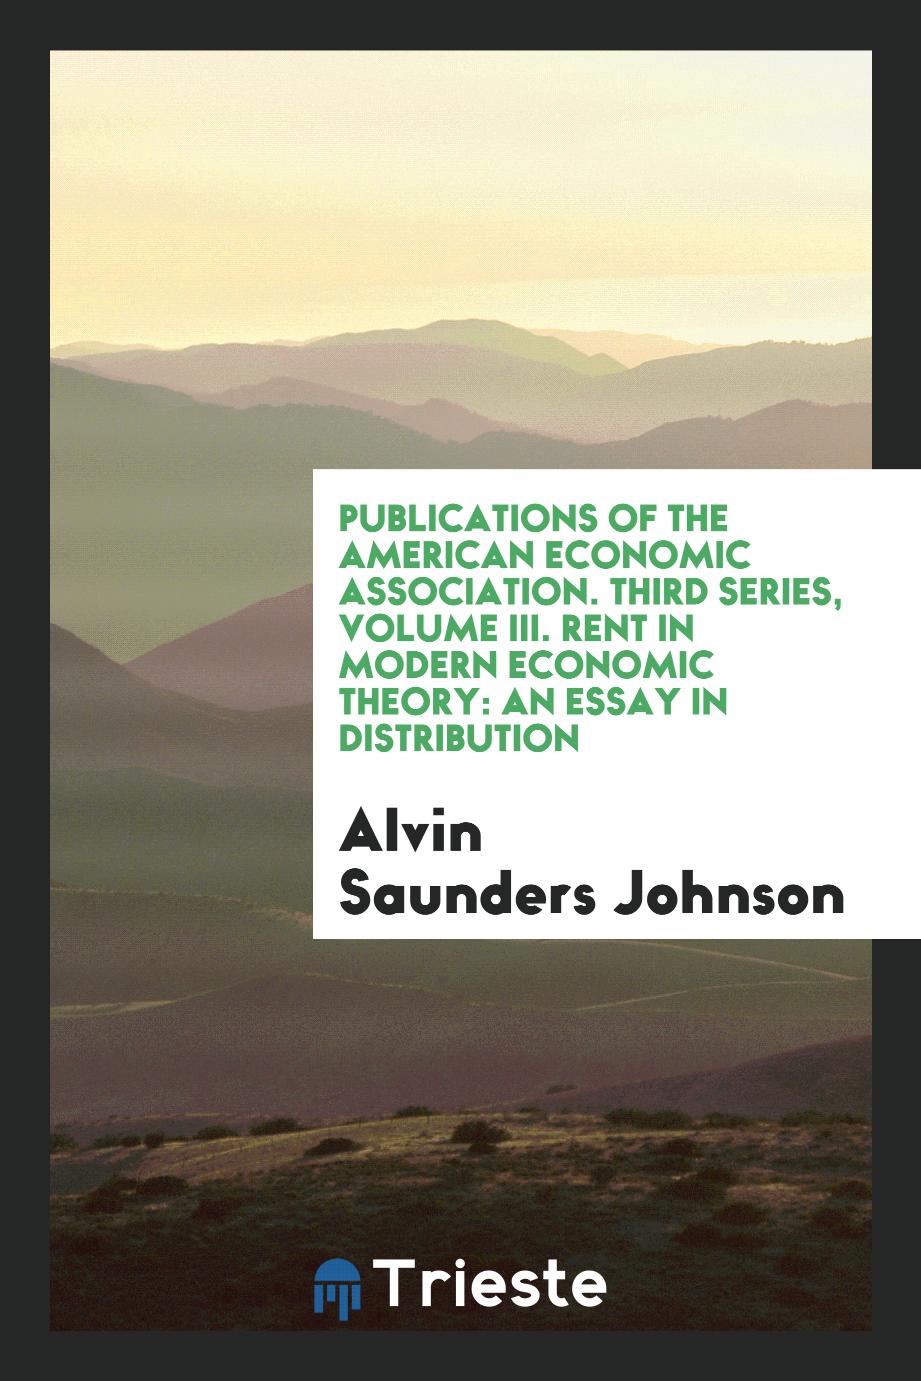 Publications of the American Economic Association. Third Series, Volume III. Rent in Modern Economic Theory: An Essay in Distribution